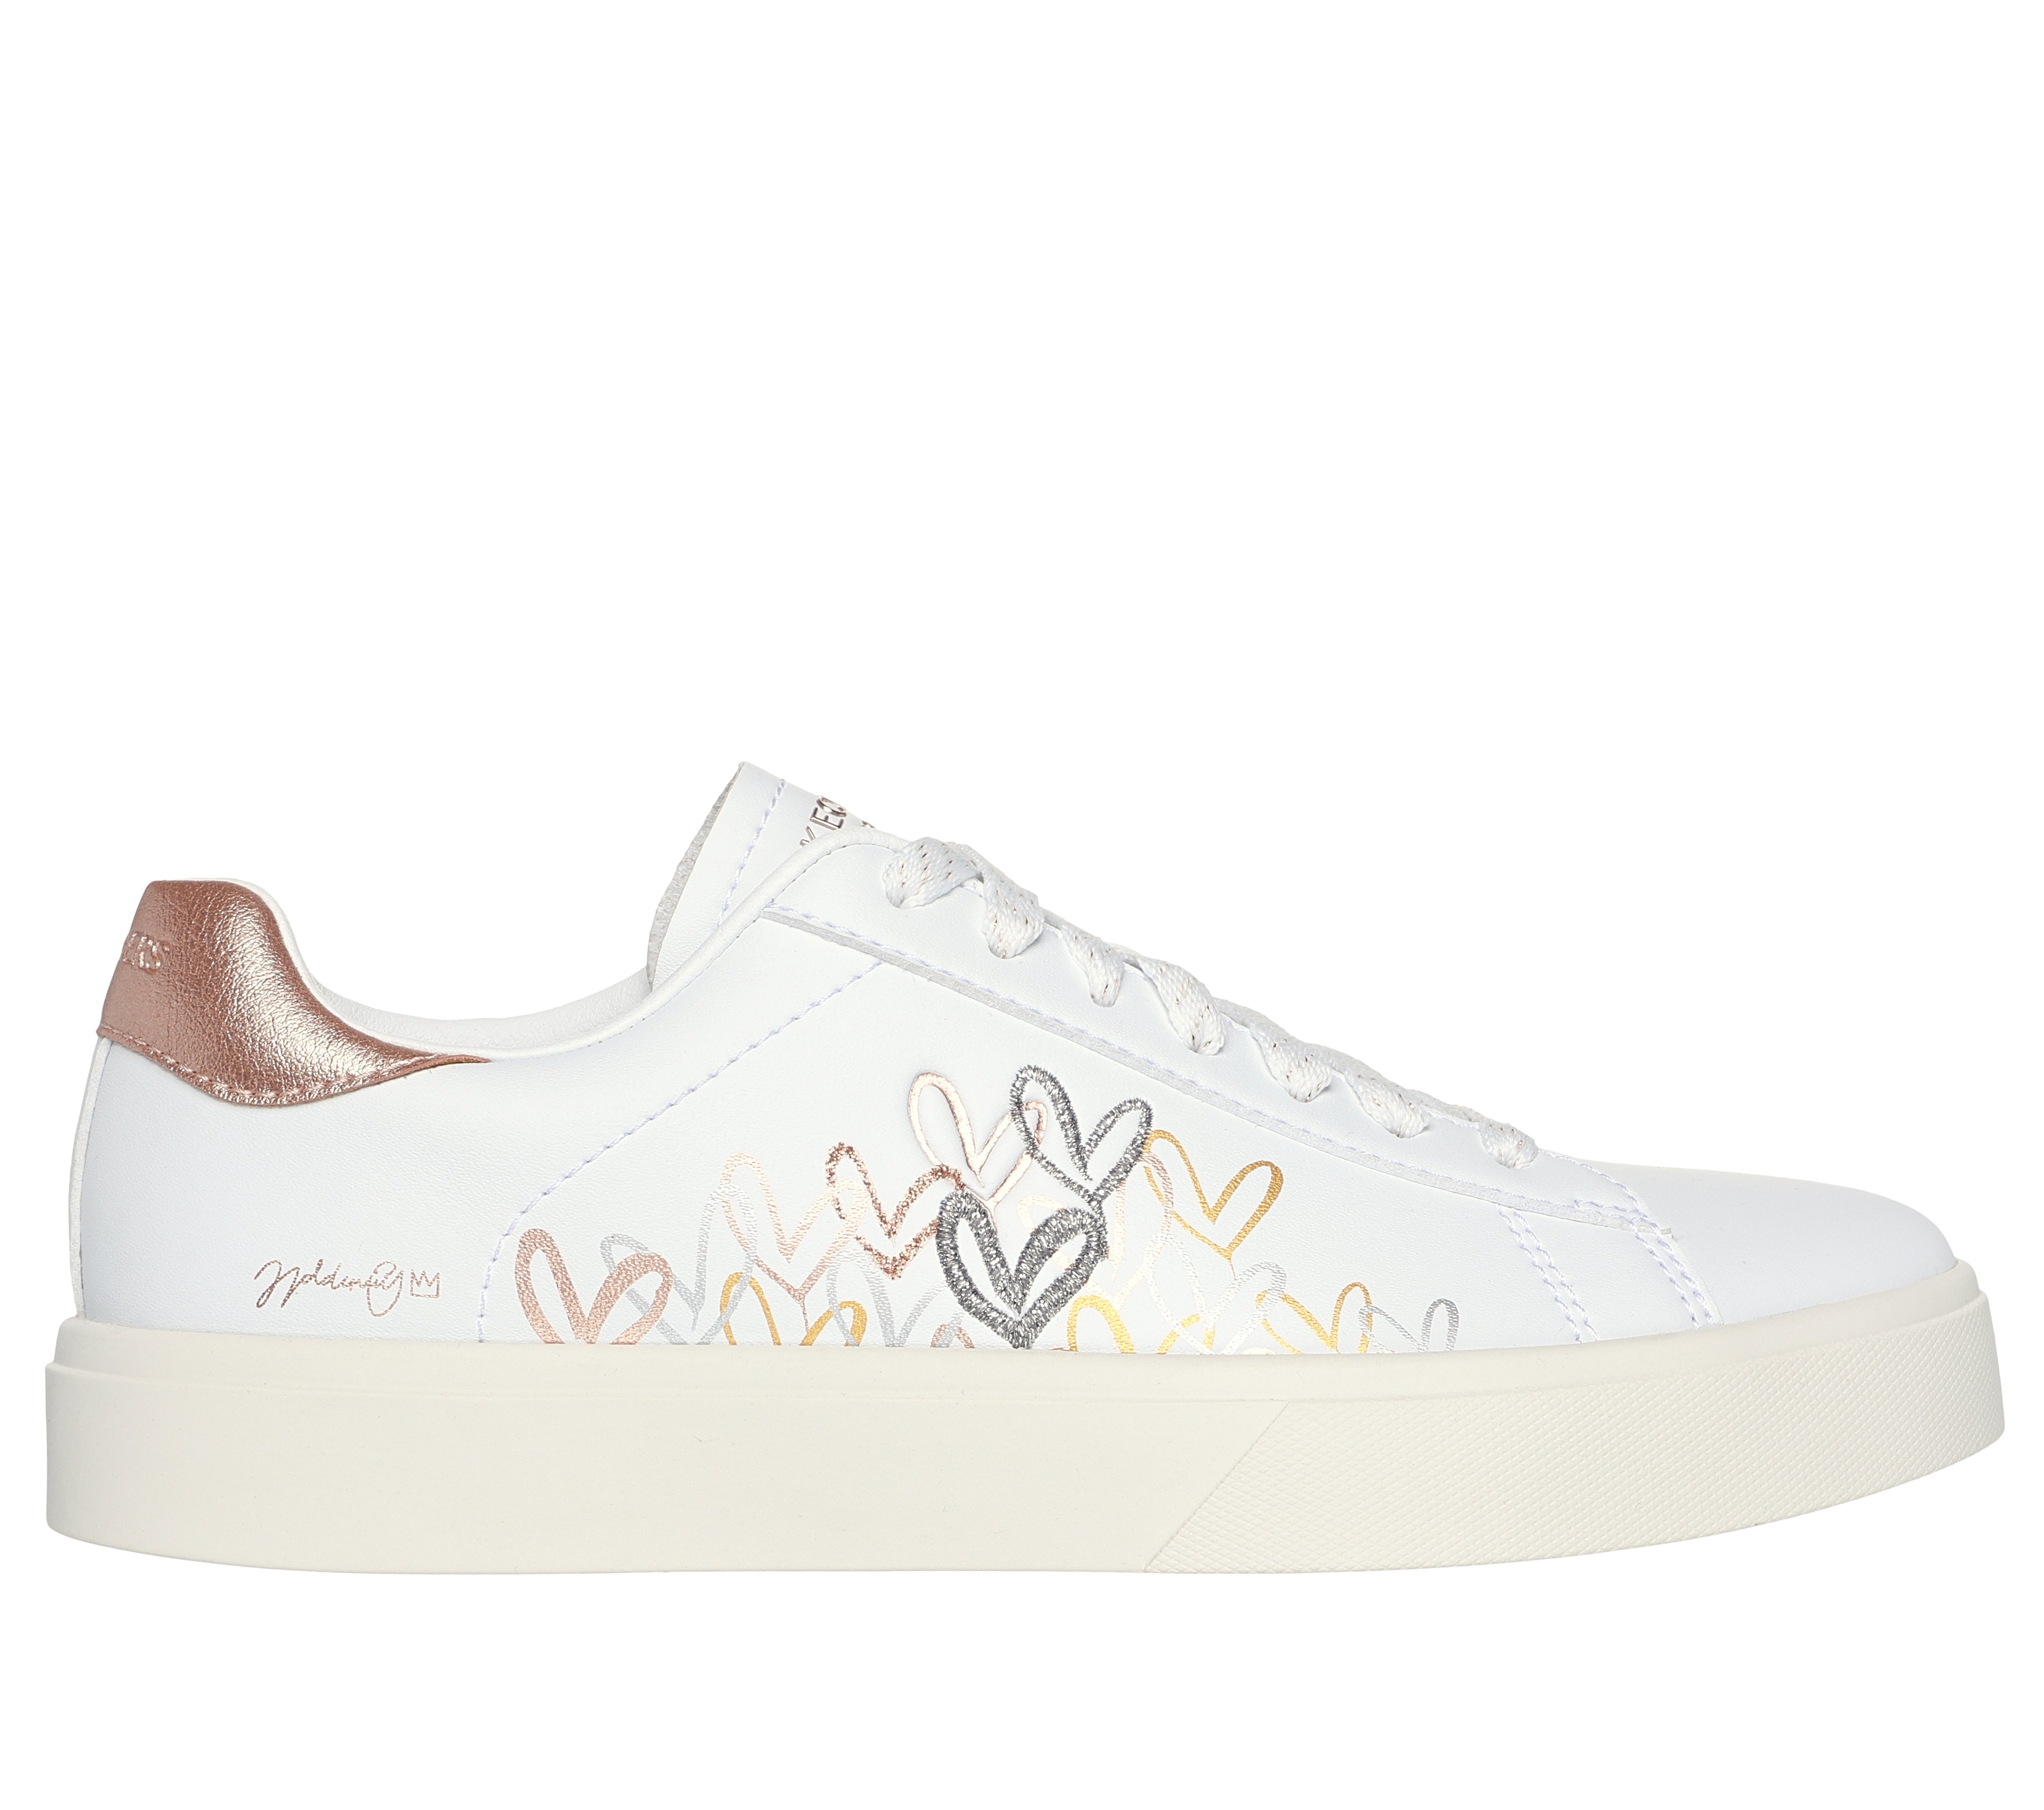 185129 - JGOLDCROWN: EDEN LX - GLEAMING HEARTS - Shoess